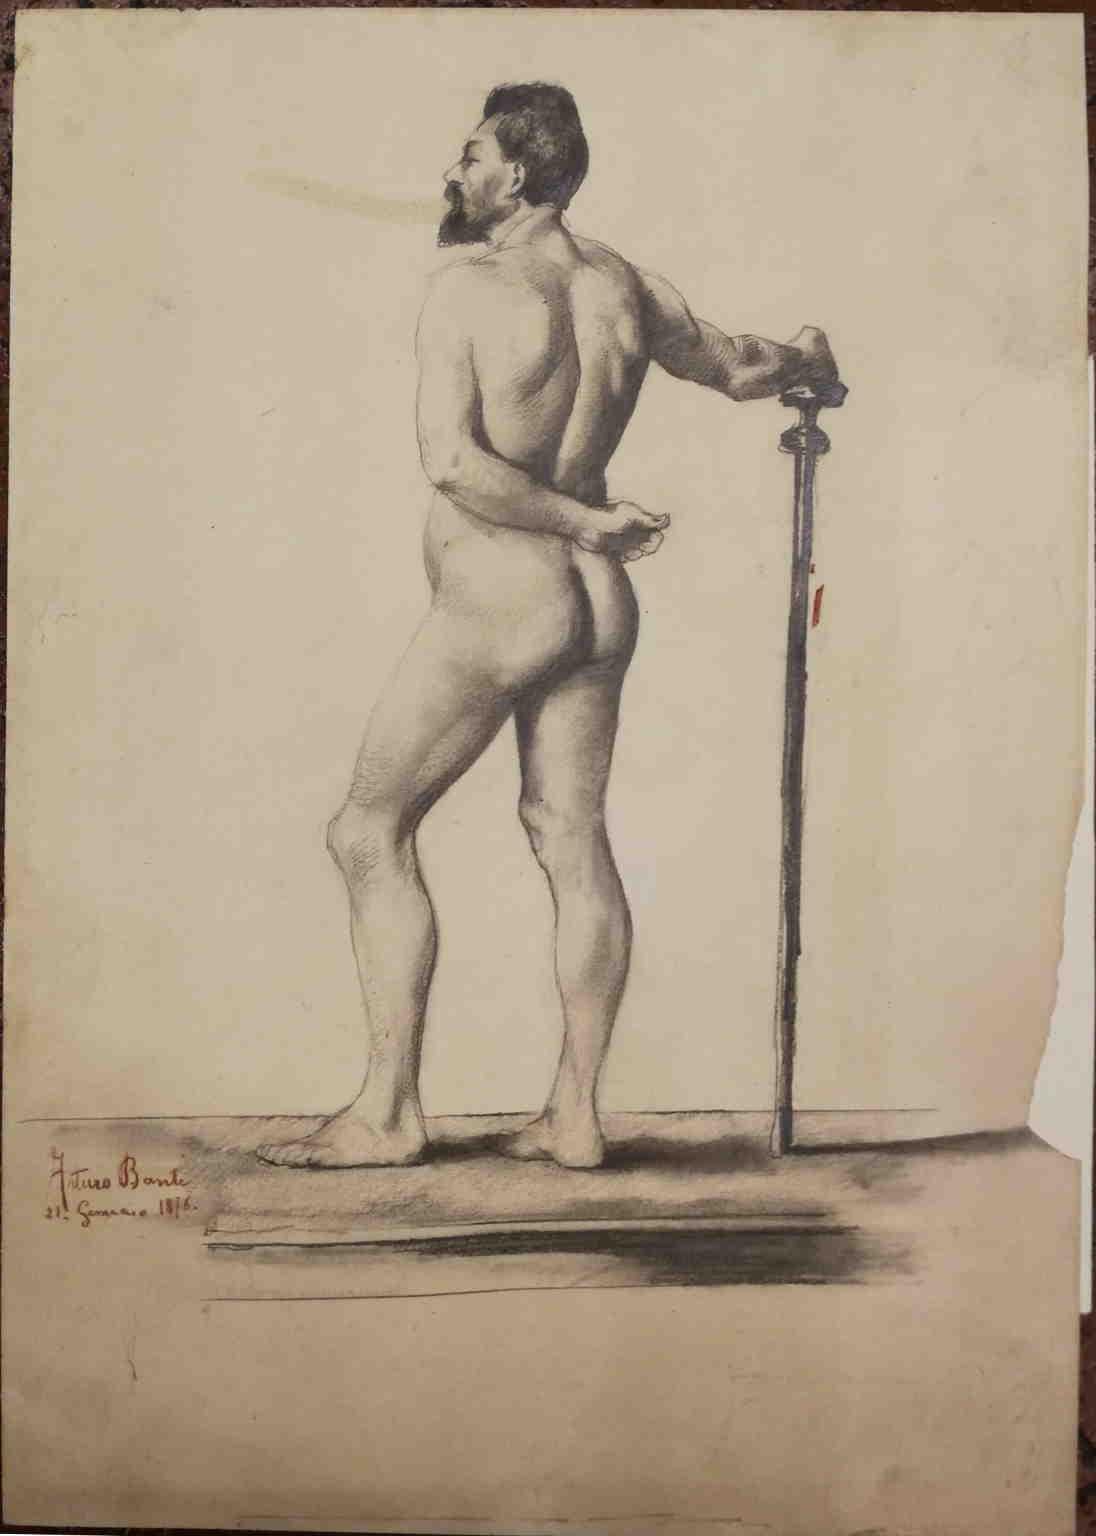 Signed dated Tuscan Banti Male Nude Academy Drawing 19th century pencil paper  - Art by Arturo Banti